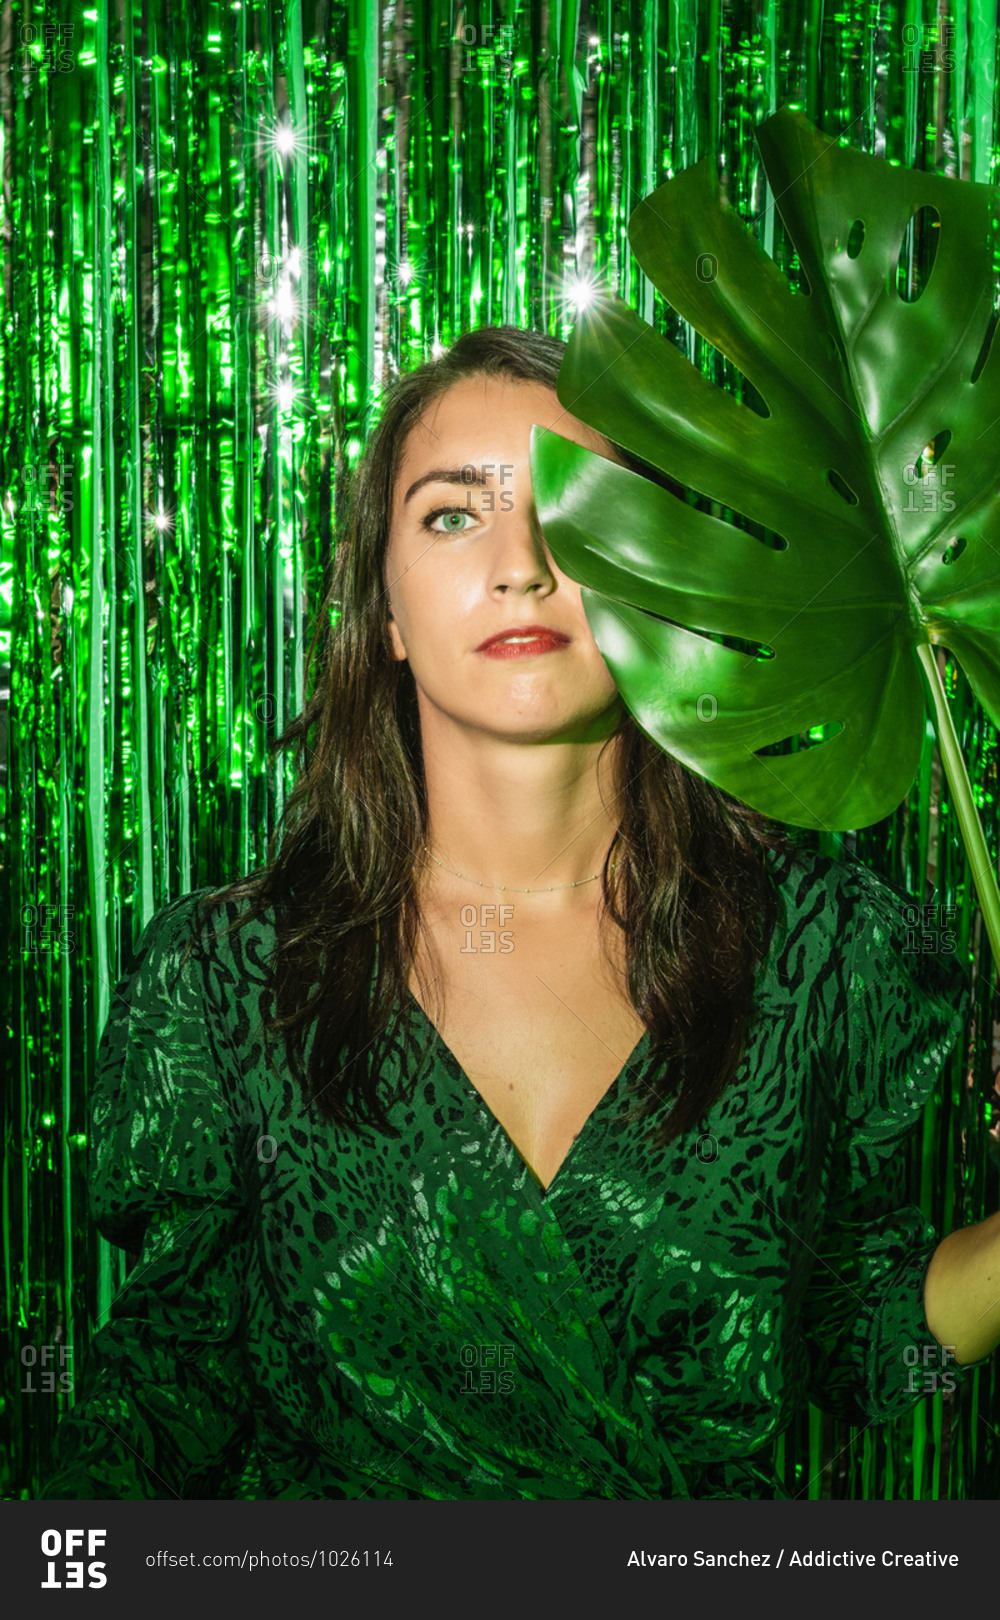 Calm female wearing stylish green dress standing with monstera leaf on background of shining foil tinsel stripes and looking at camera